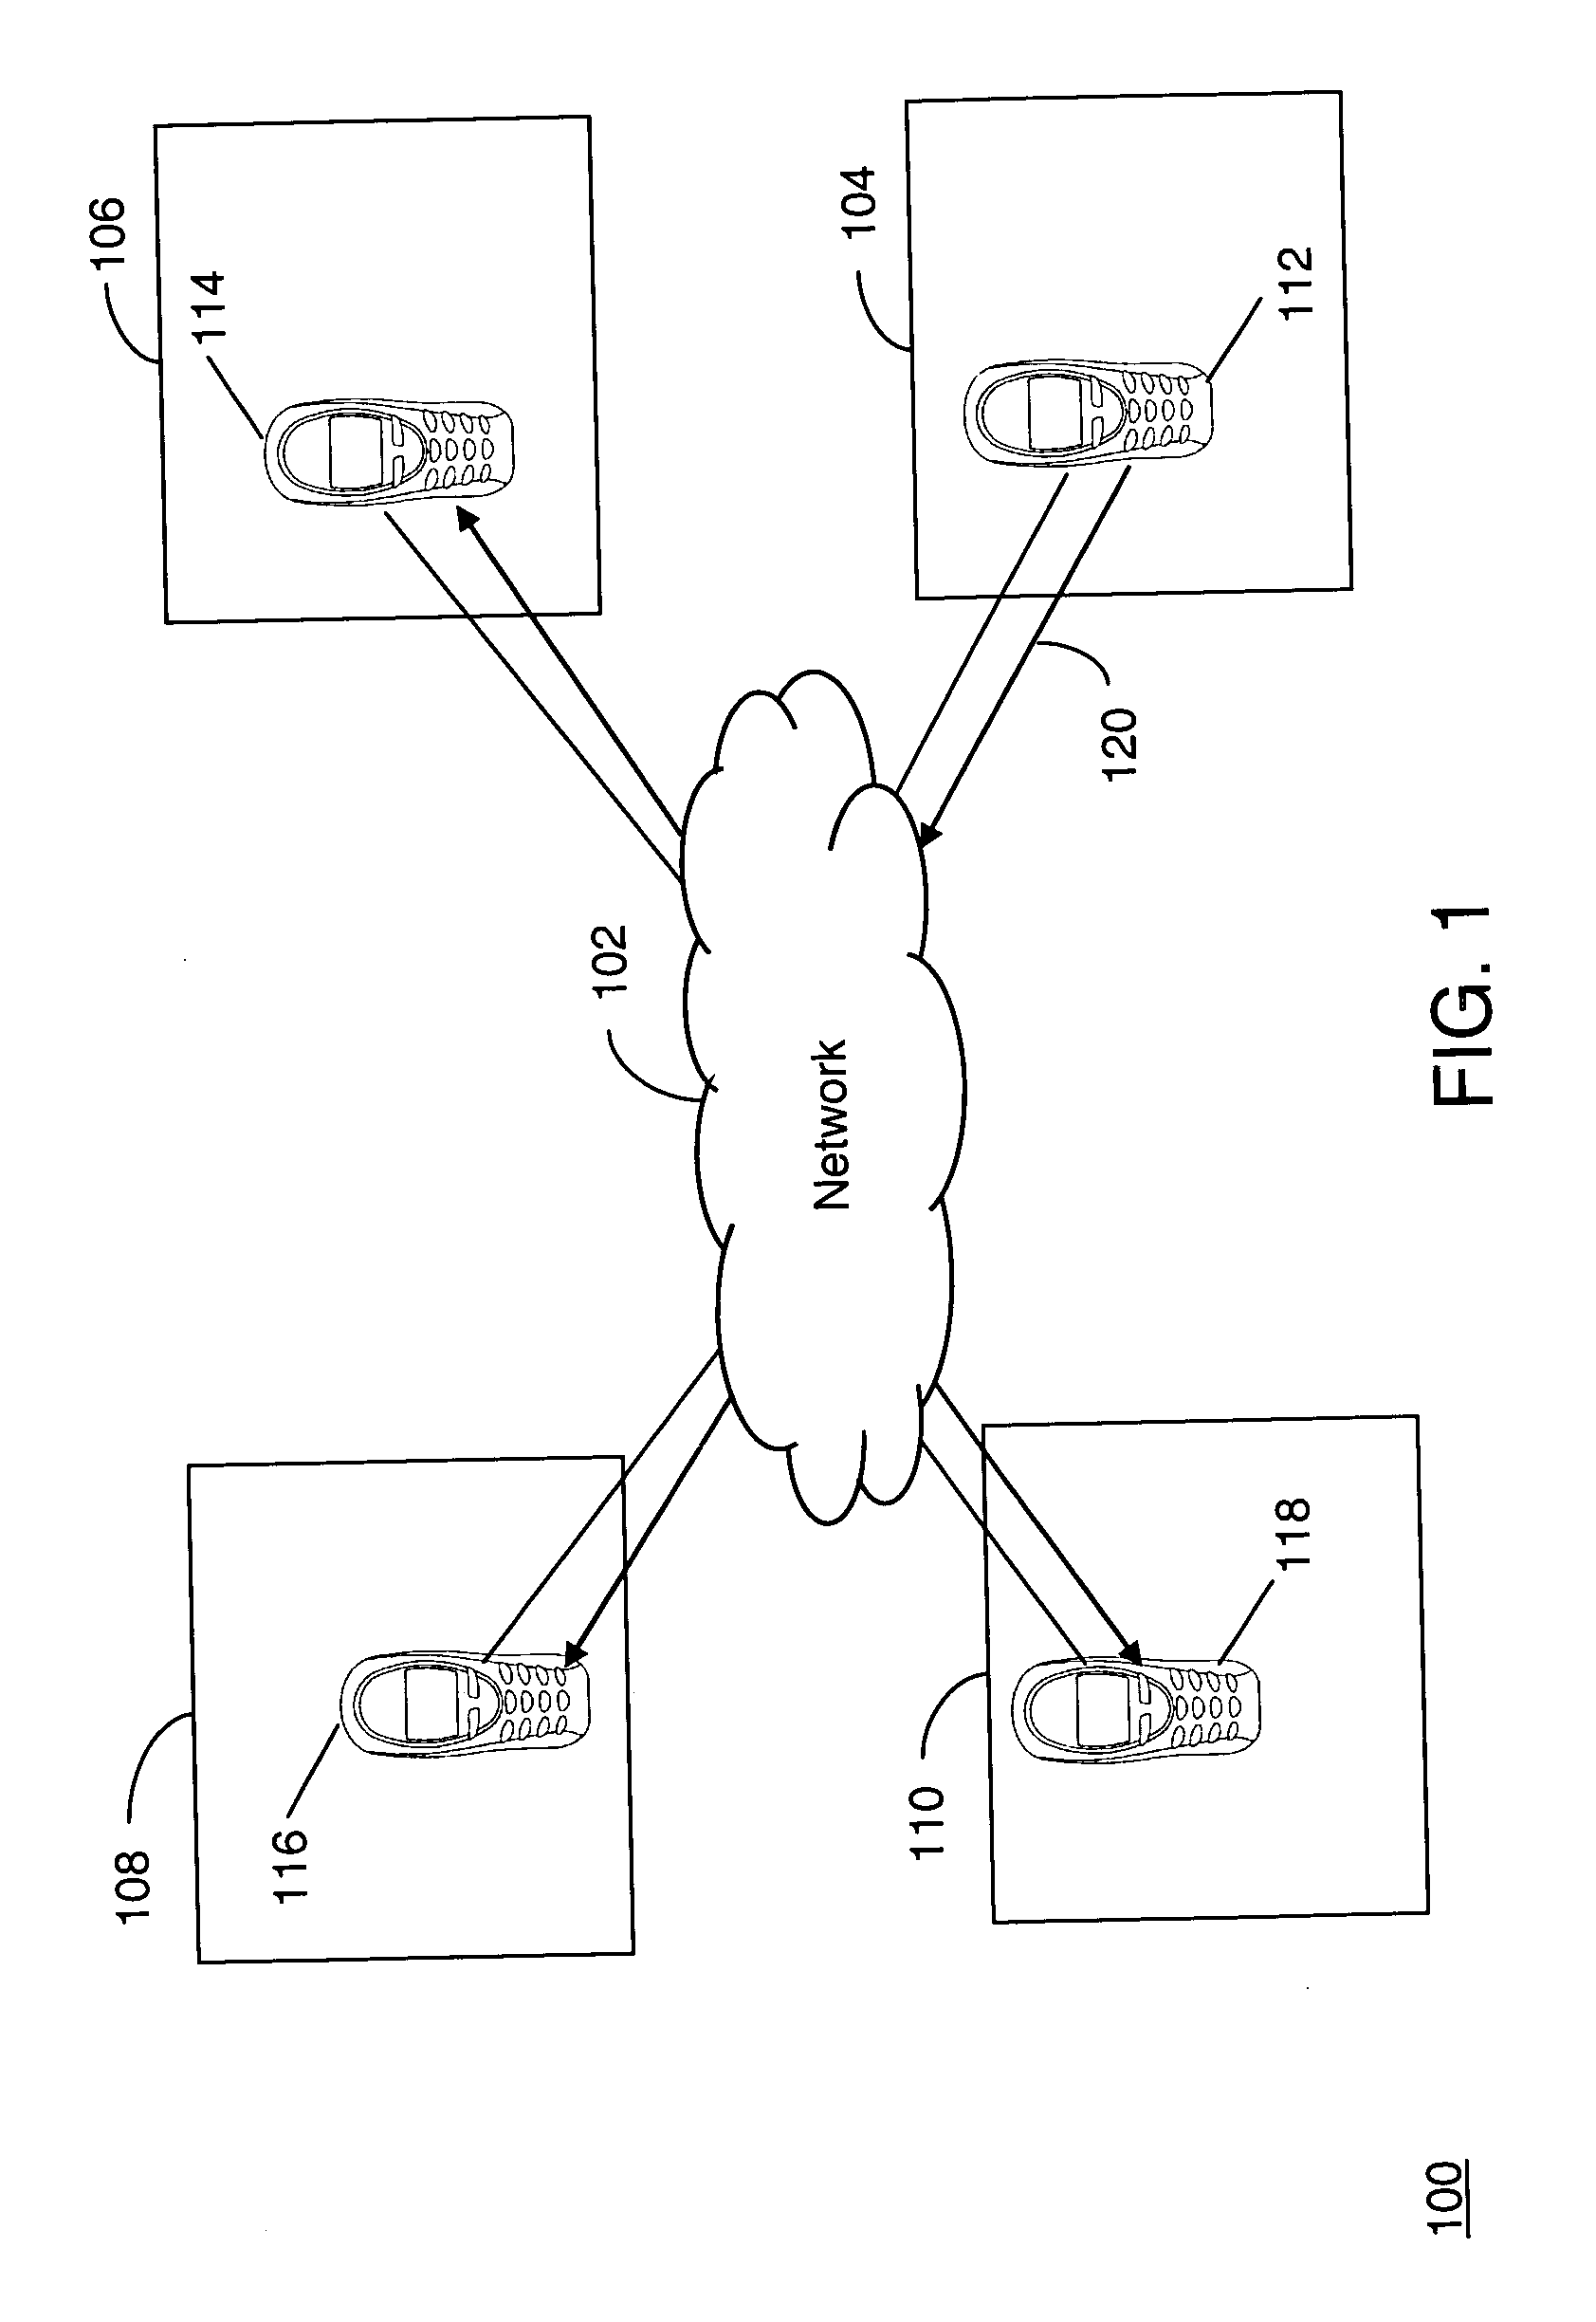 Method and apparatus for enhanced identification of individual(s)